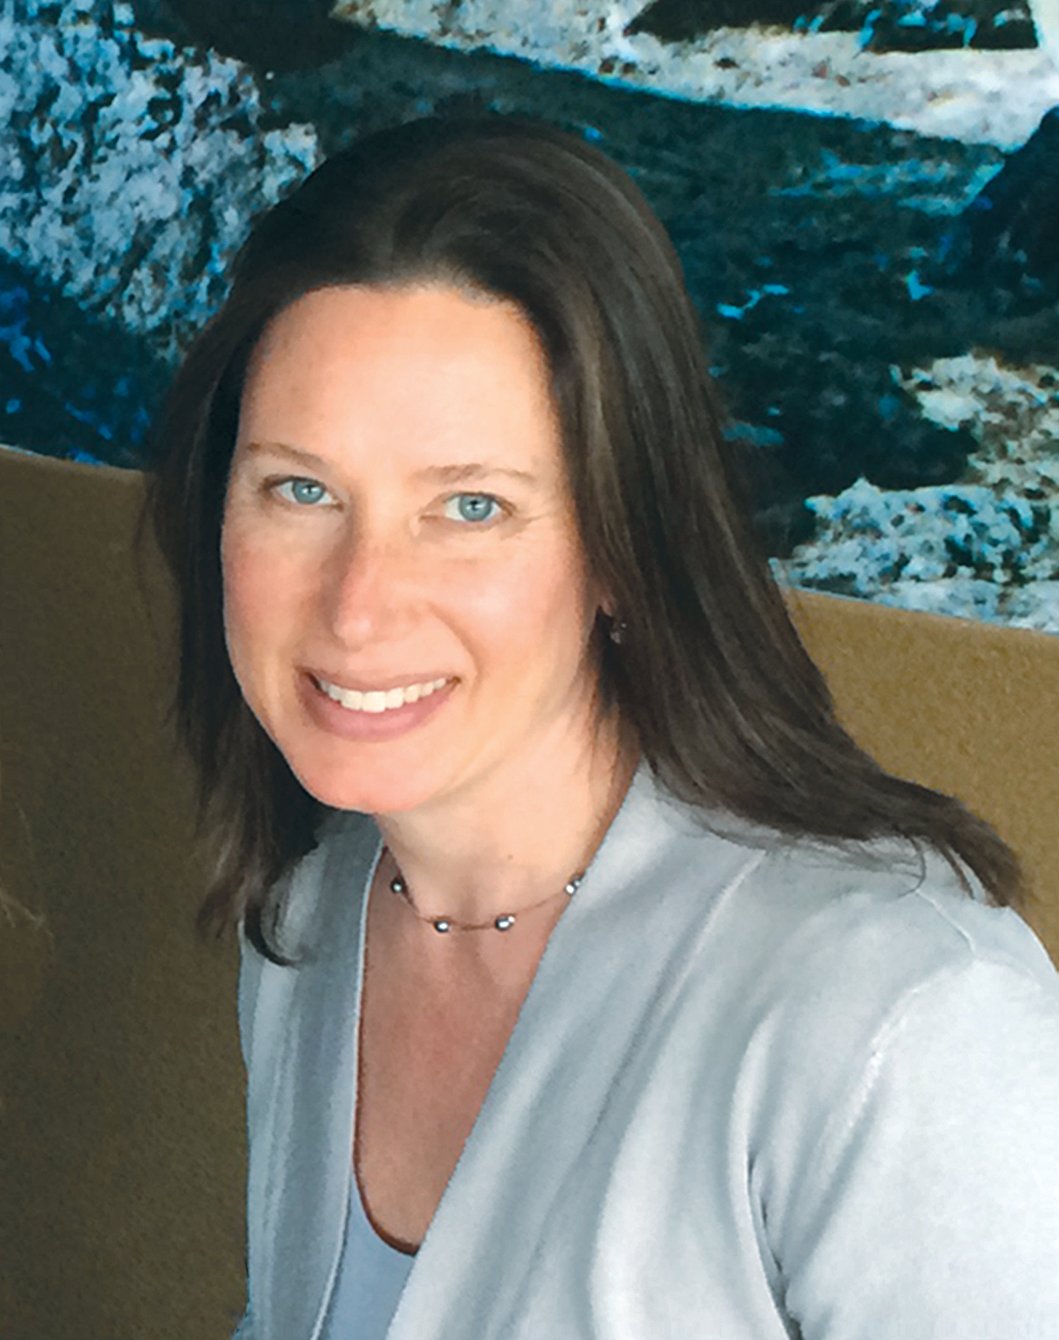 PLANNING AND PROGRAMMING: Katie Cubina serves as the senior vice president for mission programs at Mystic Aquarium and expressed her excitement for receiving this grant from the National Marine Sanctuary Foundation and NOAA Ocean Exploration.